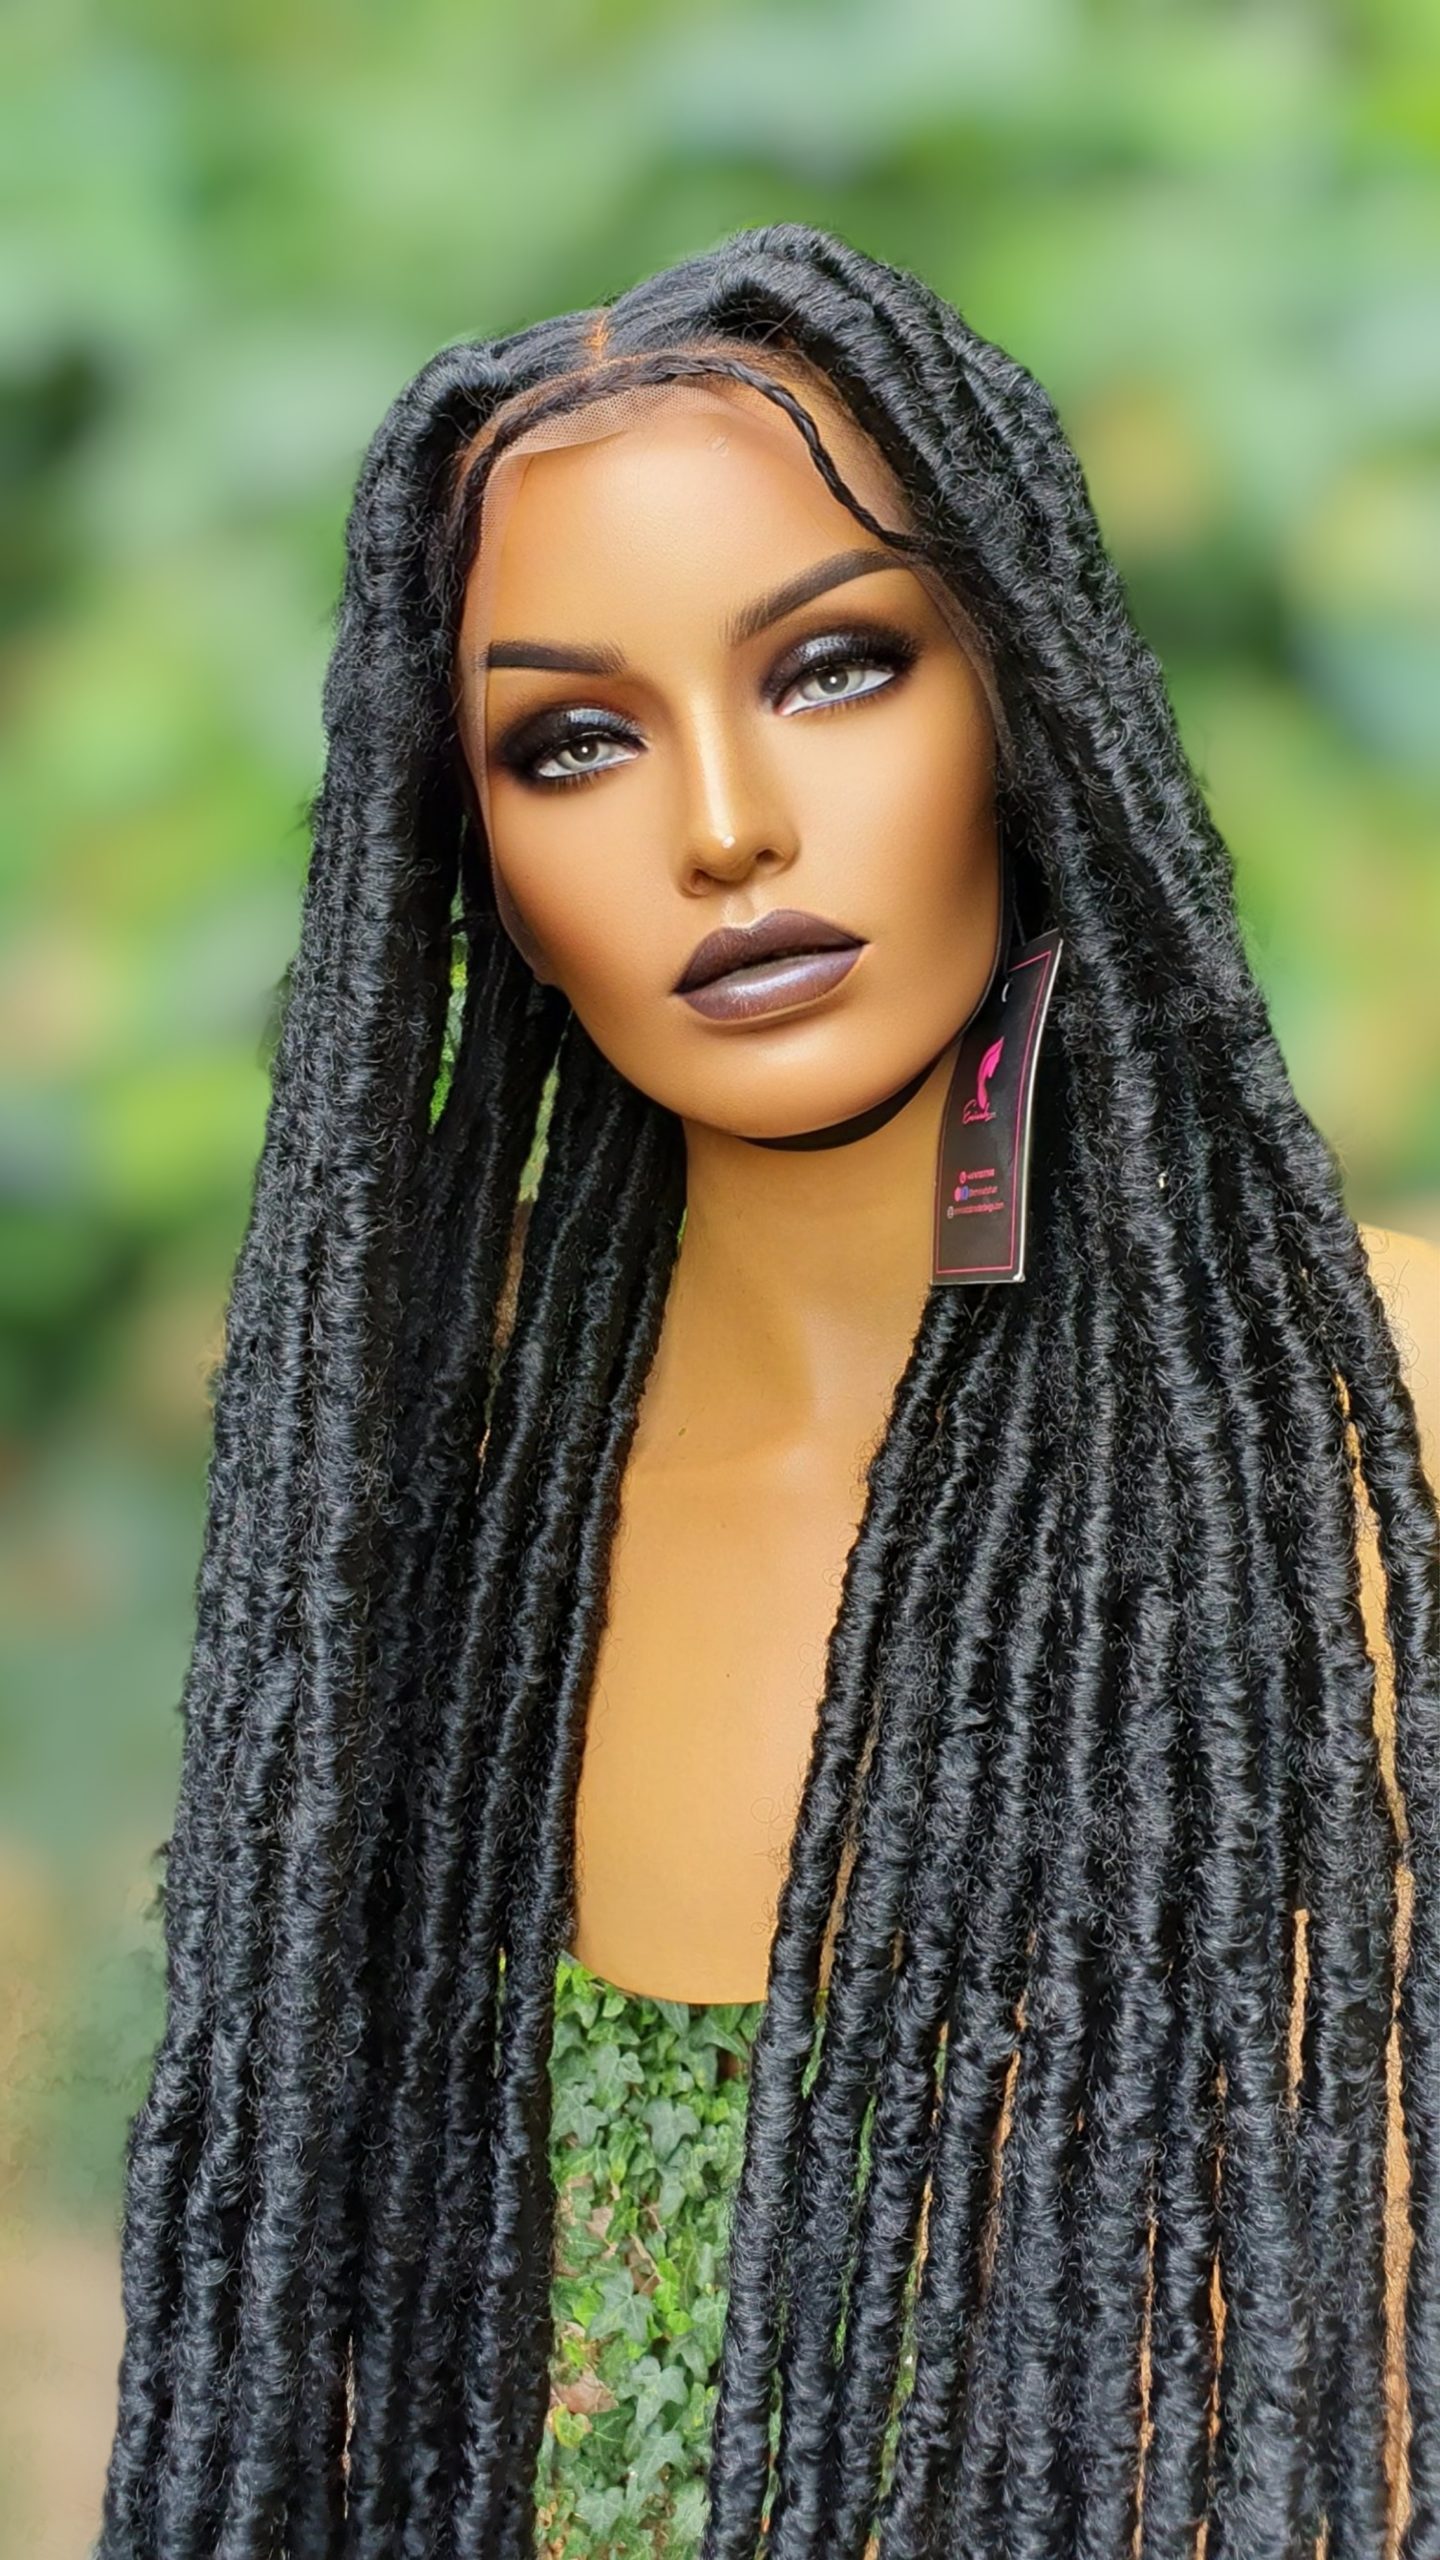 fulllace afro braided wig ,lace front wig cornrow wig faux locs wig.Front  lace braided wig.wigs for black women